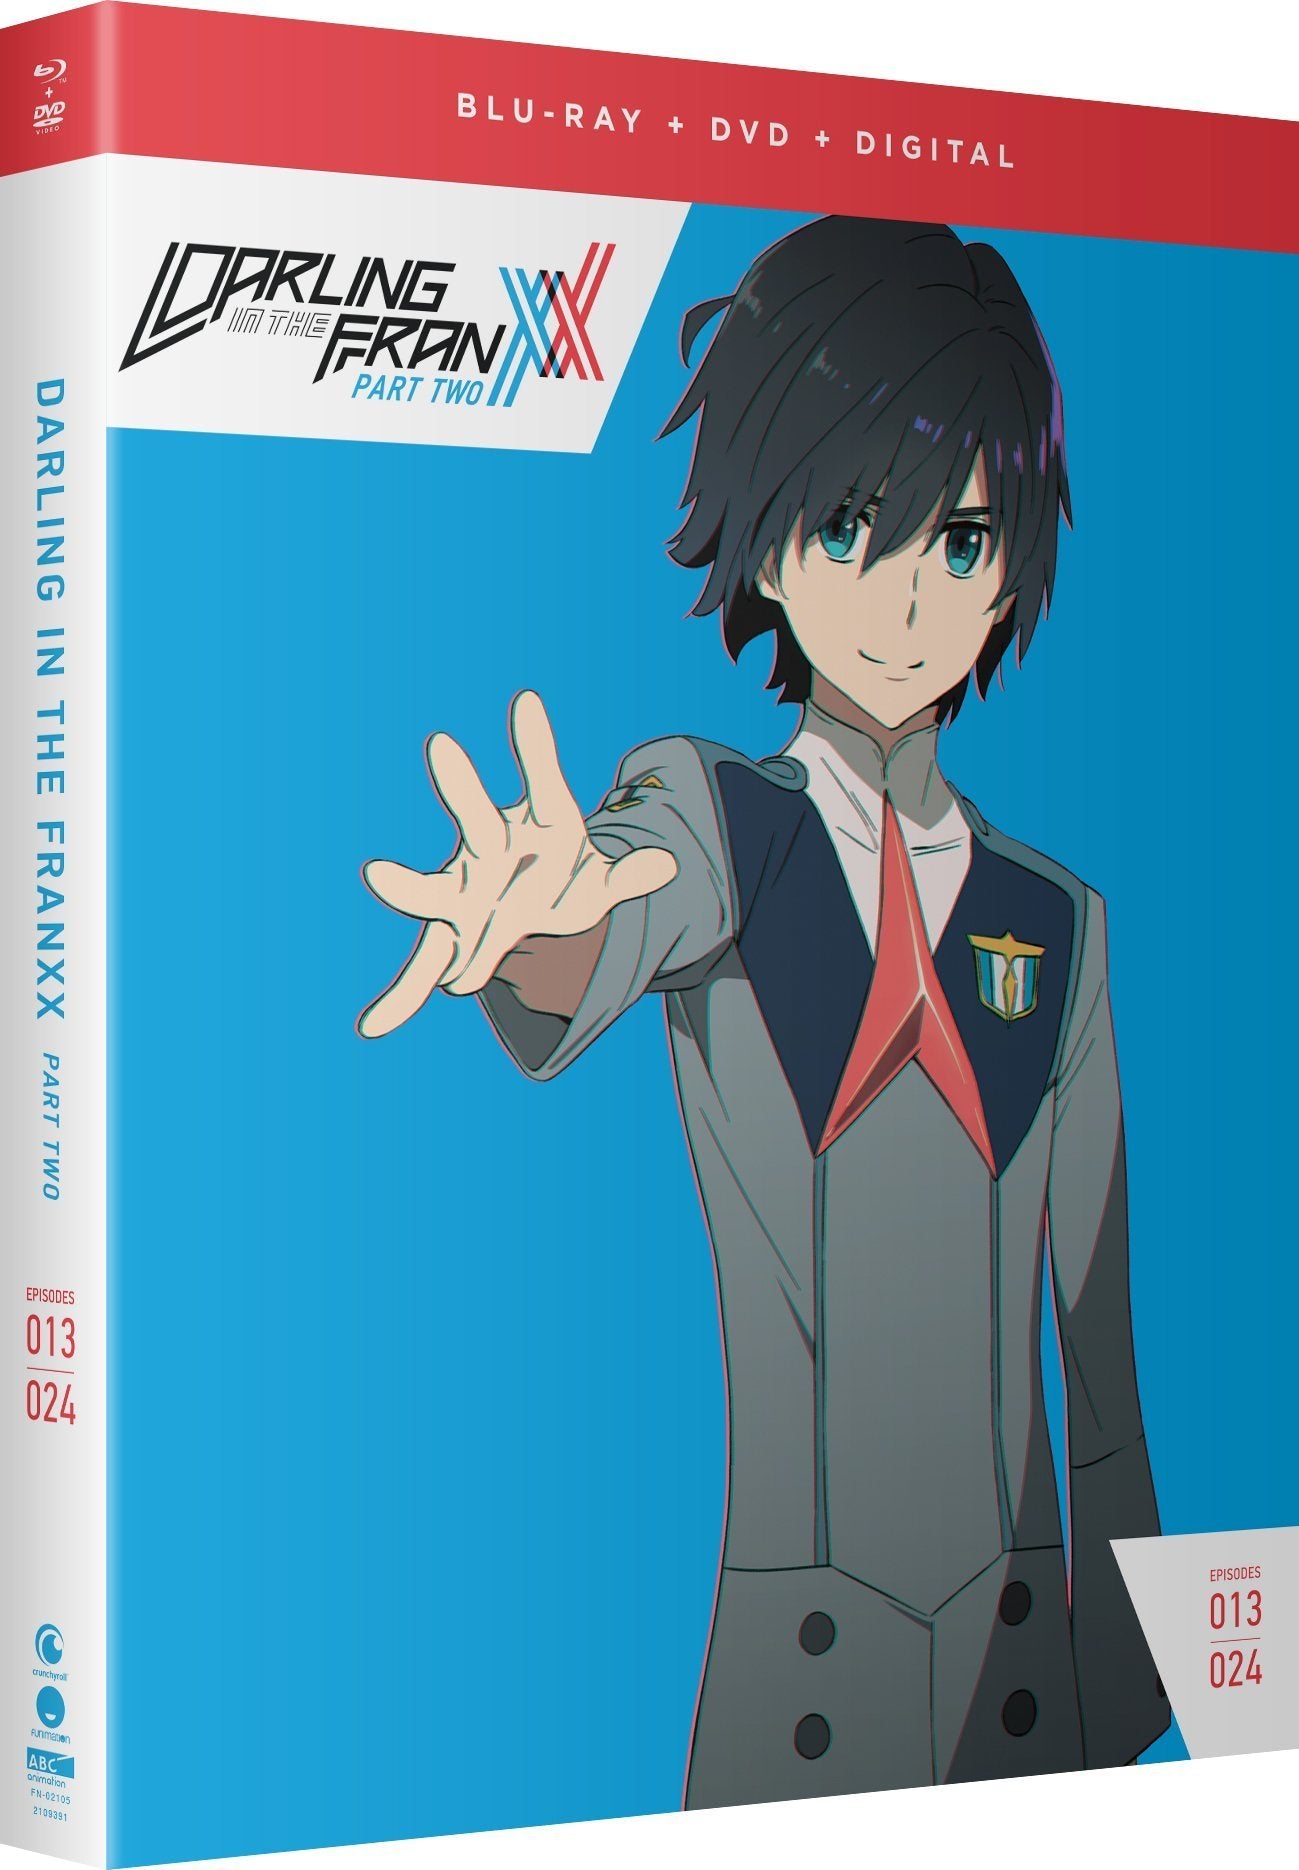 DARLING in the FRANXX - Part 2 Blu-ray + DVD image count 1